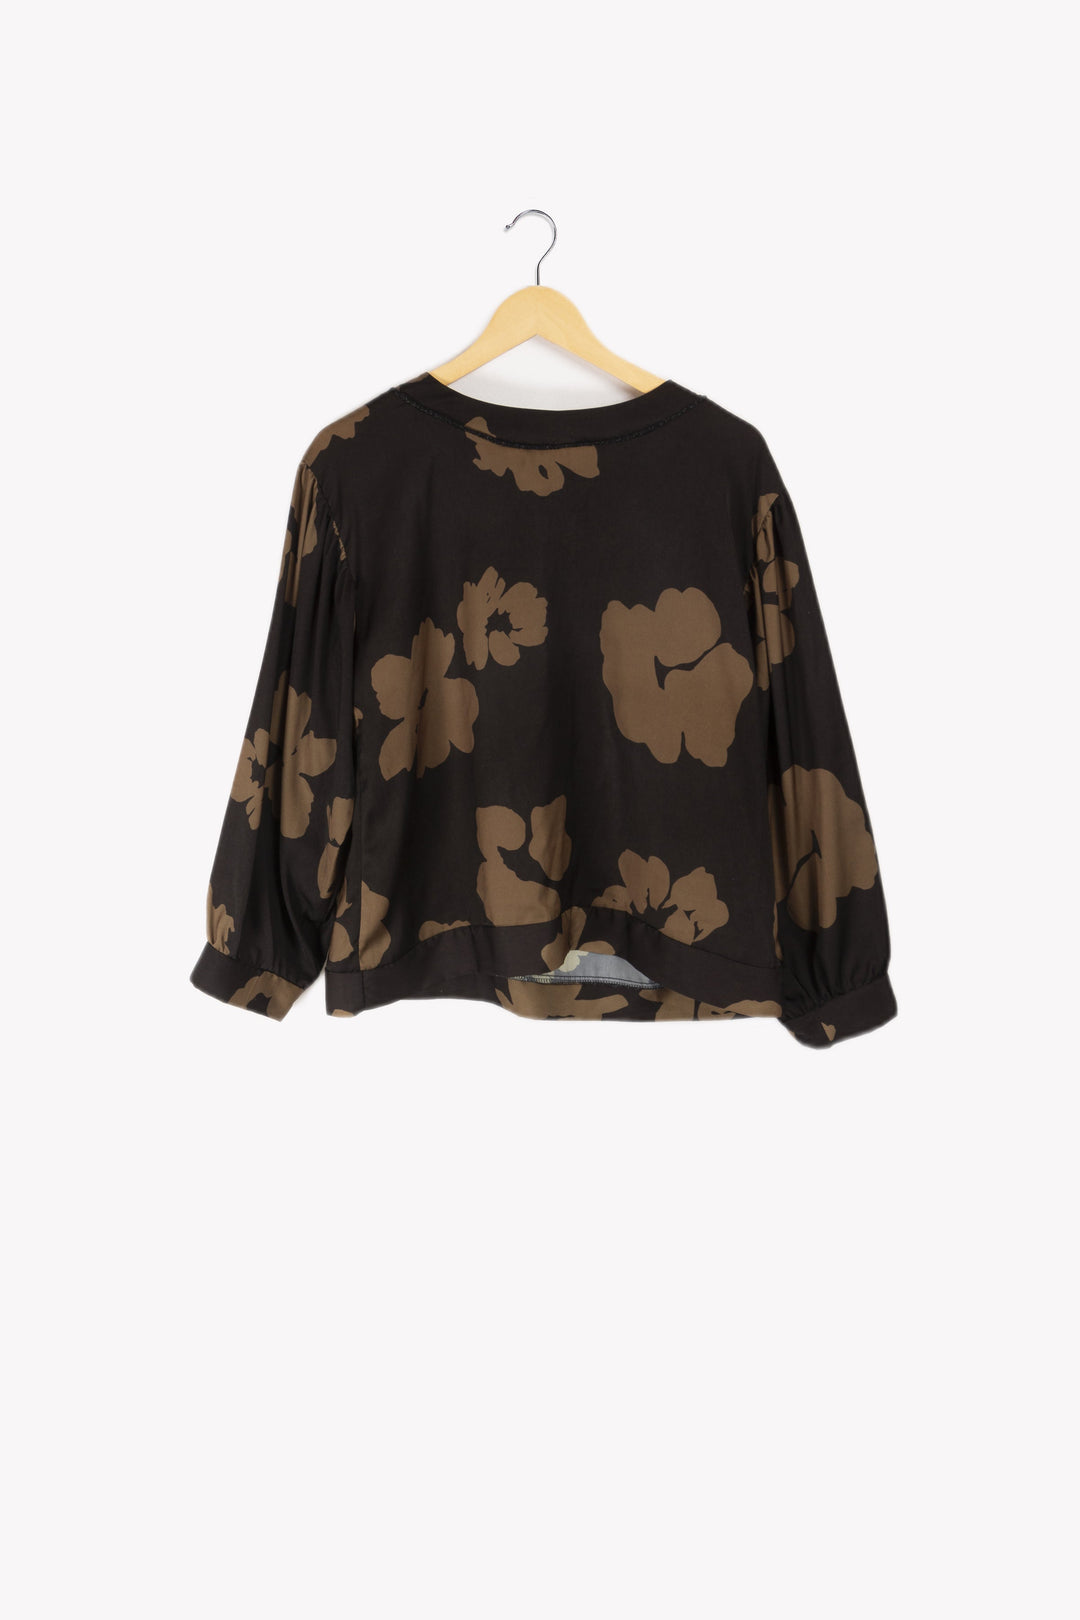 Black blouse with mustard floral pattern - 40